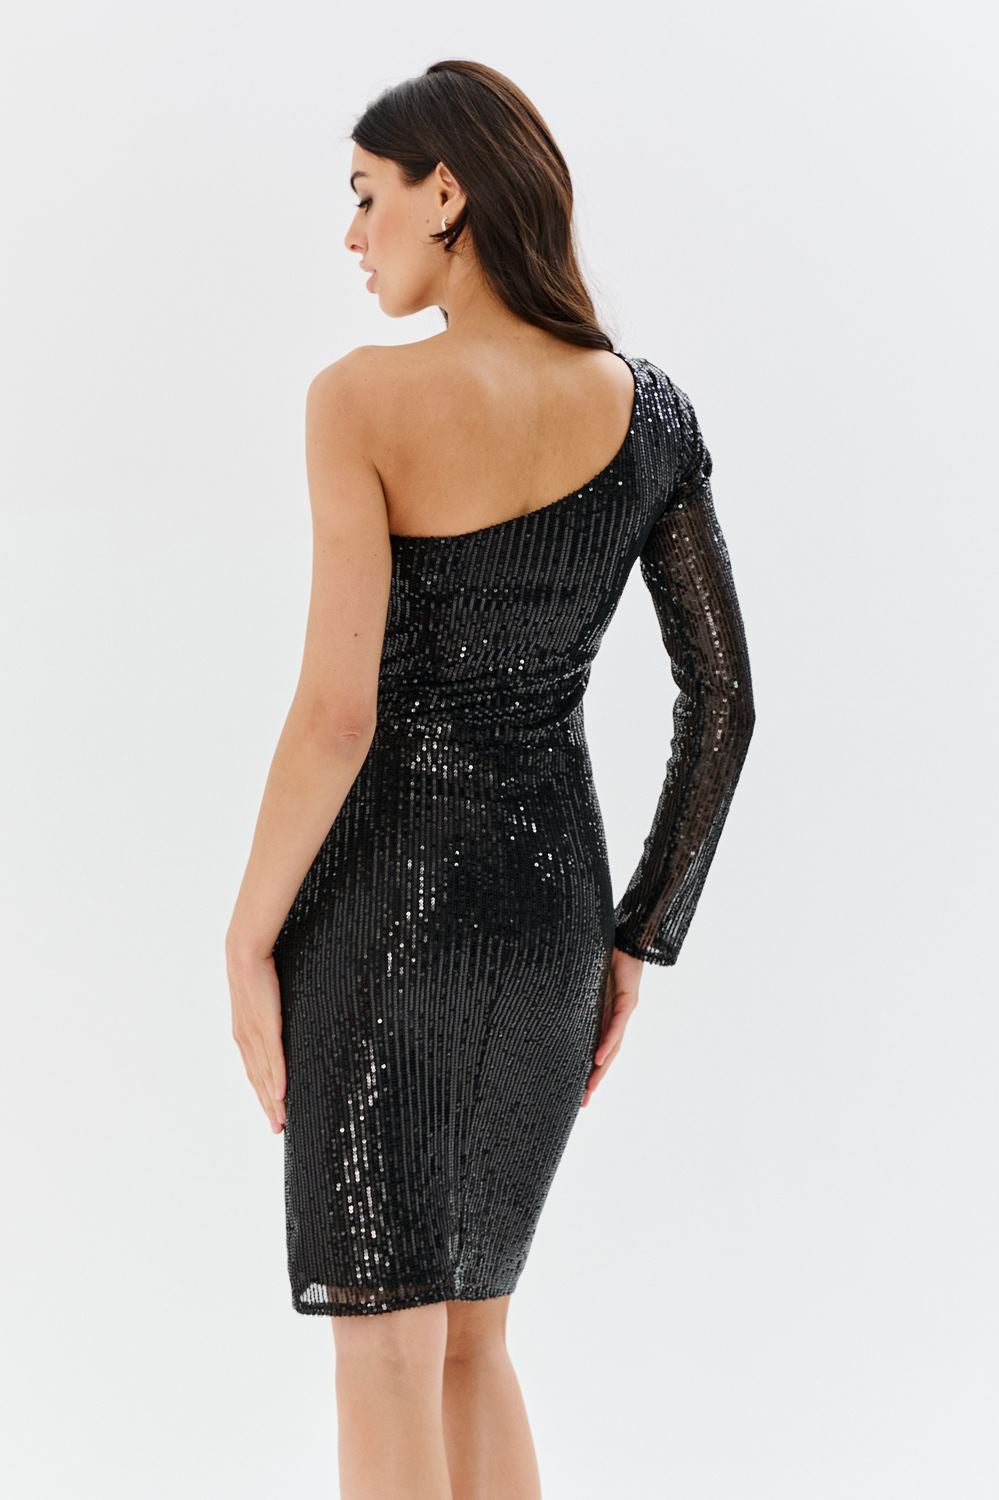 The After Midnight one-shoulder dress